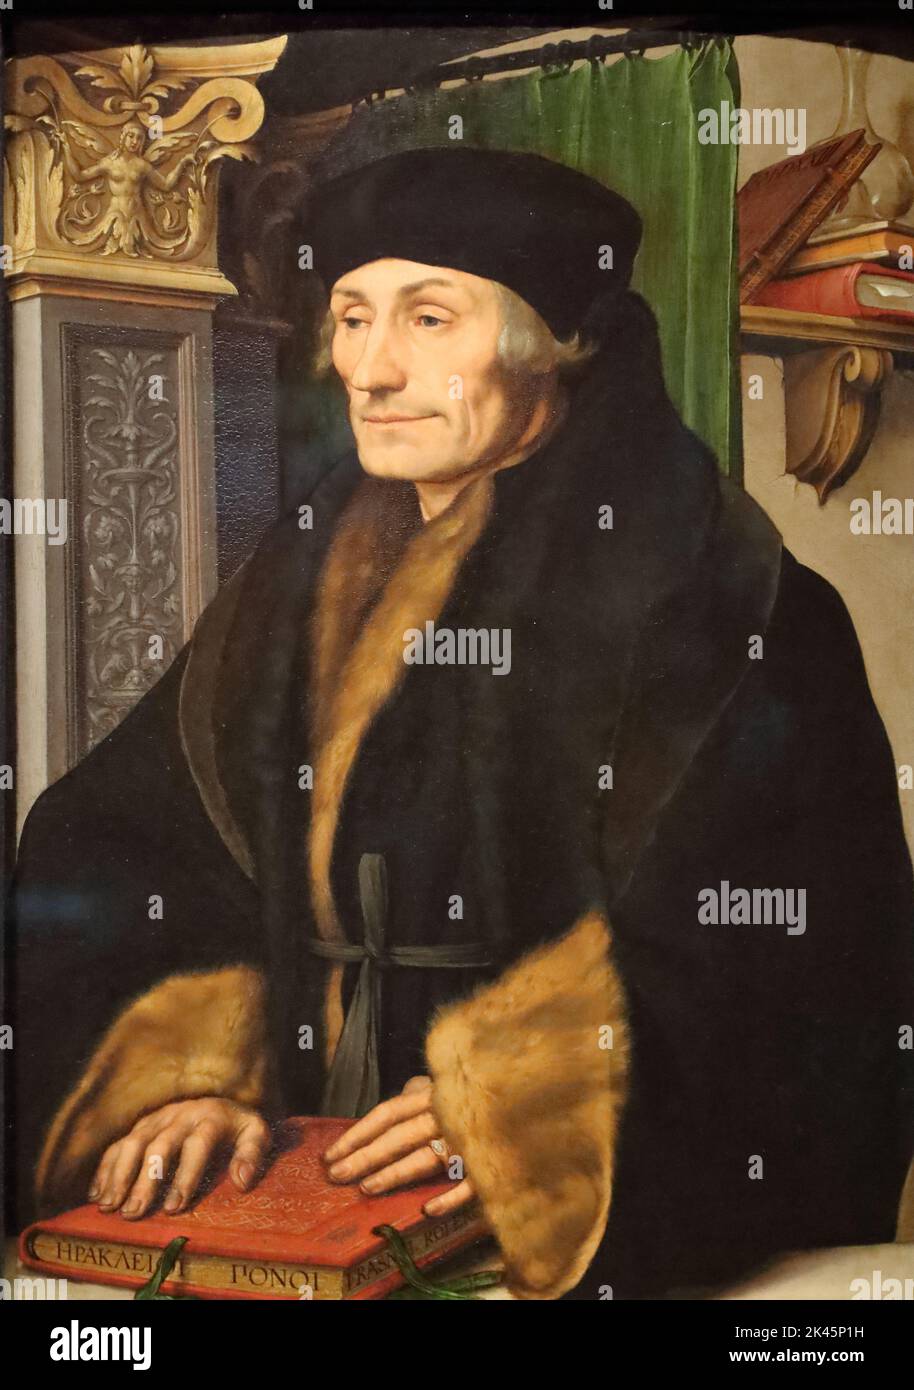 Erasmus by German-Swiss Renaissance painter Hans Holbein the Younger at the National Gallery, London, UK Stock Photo